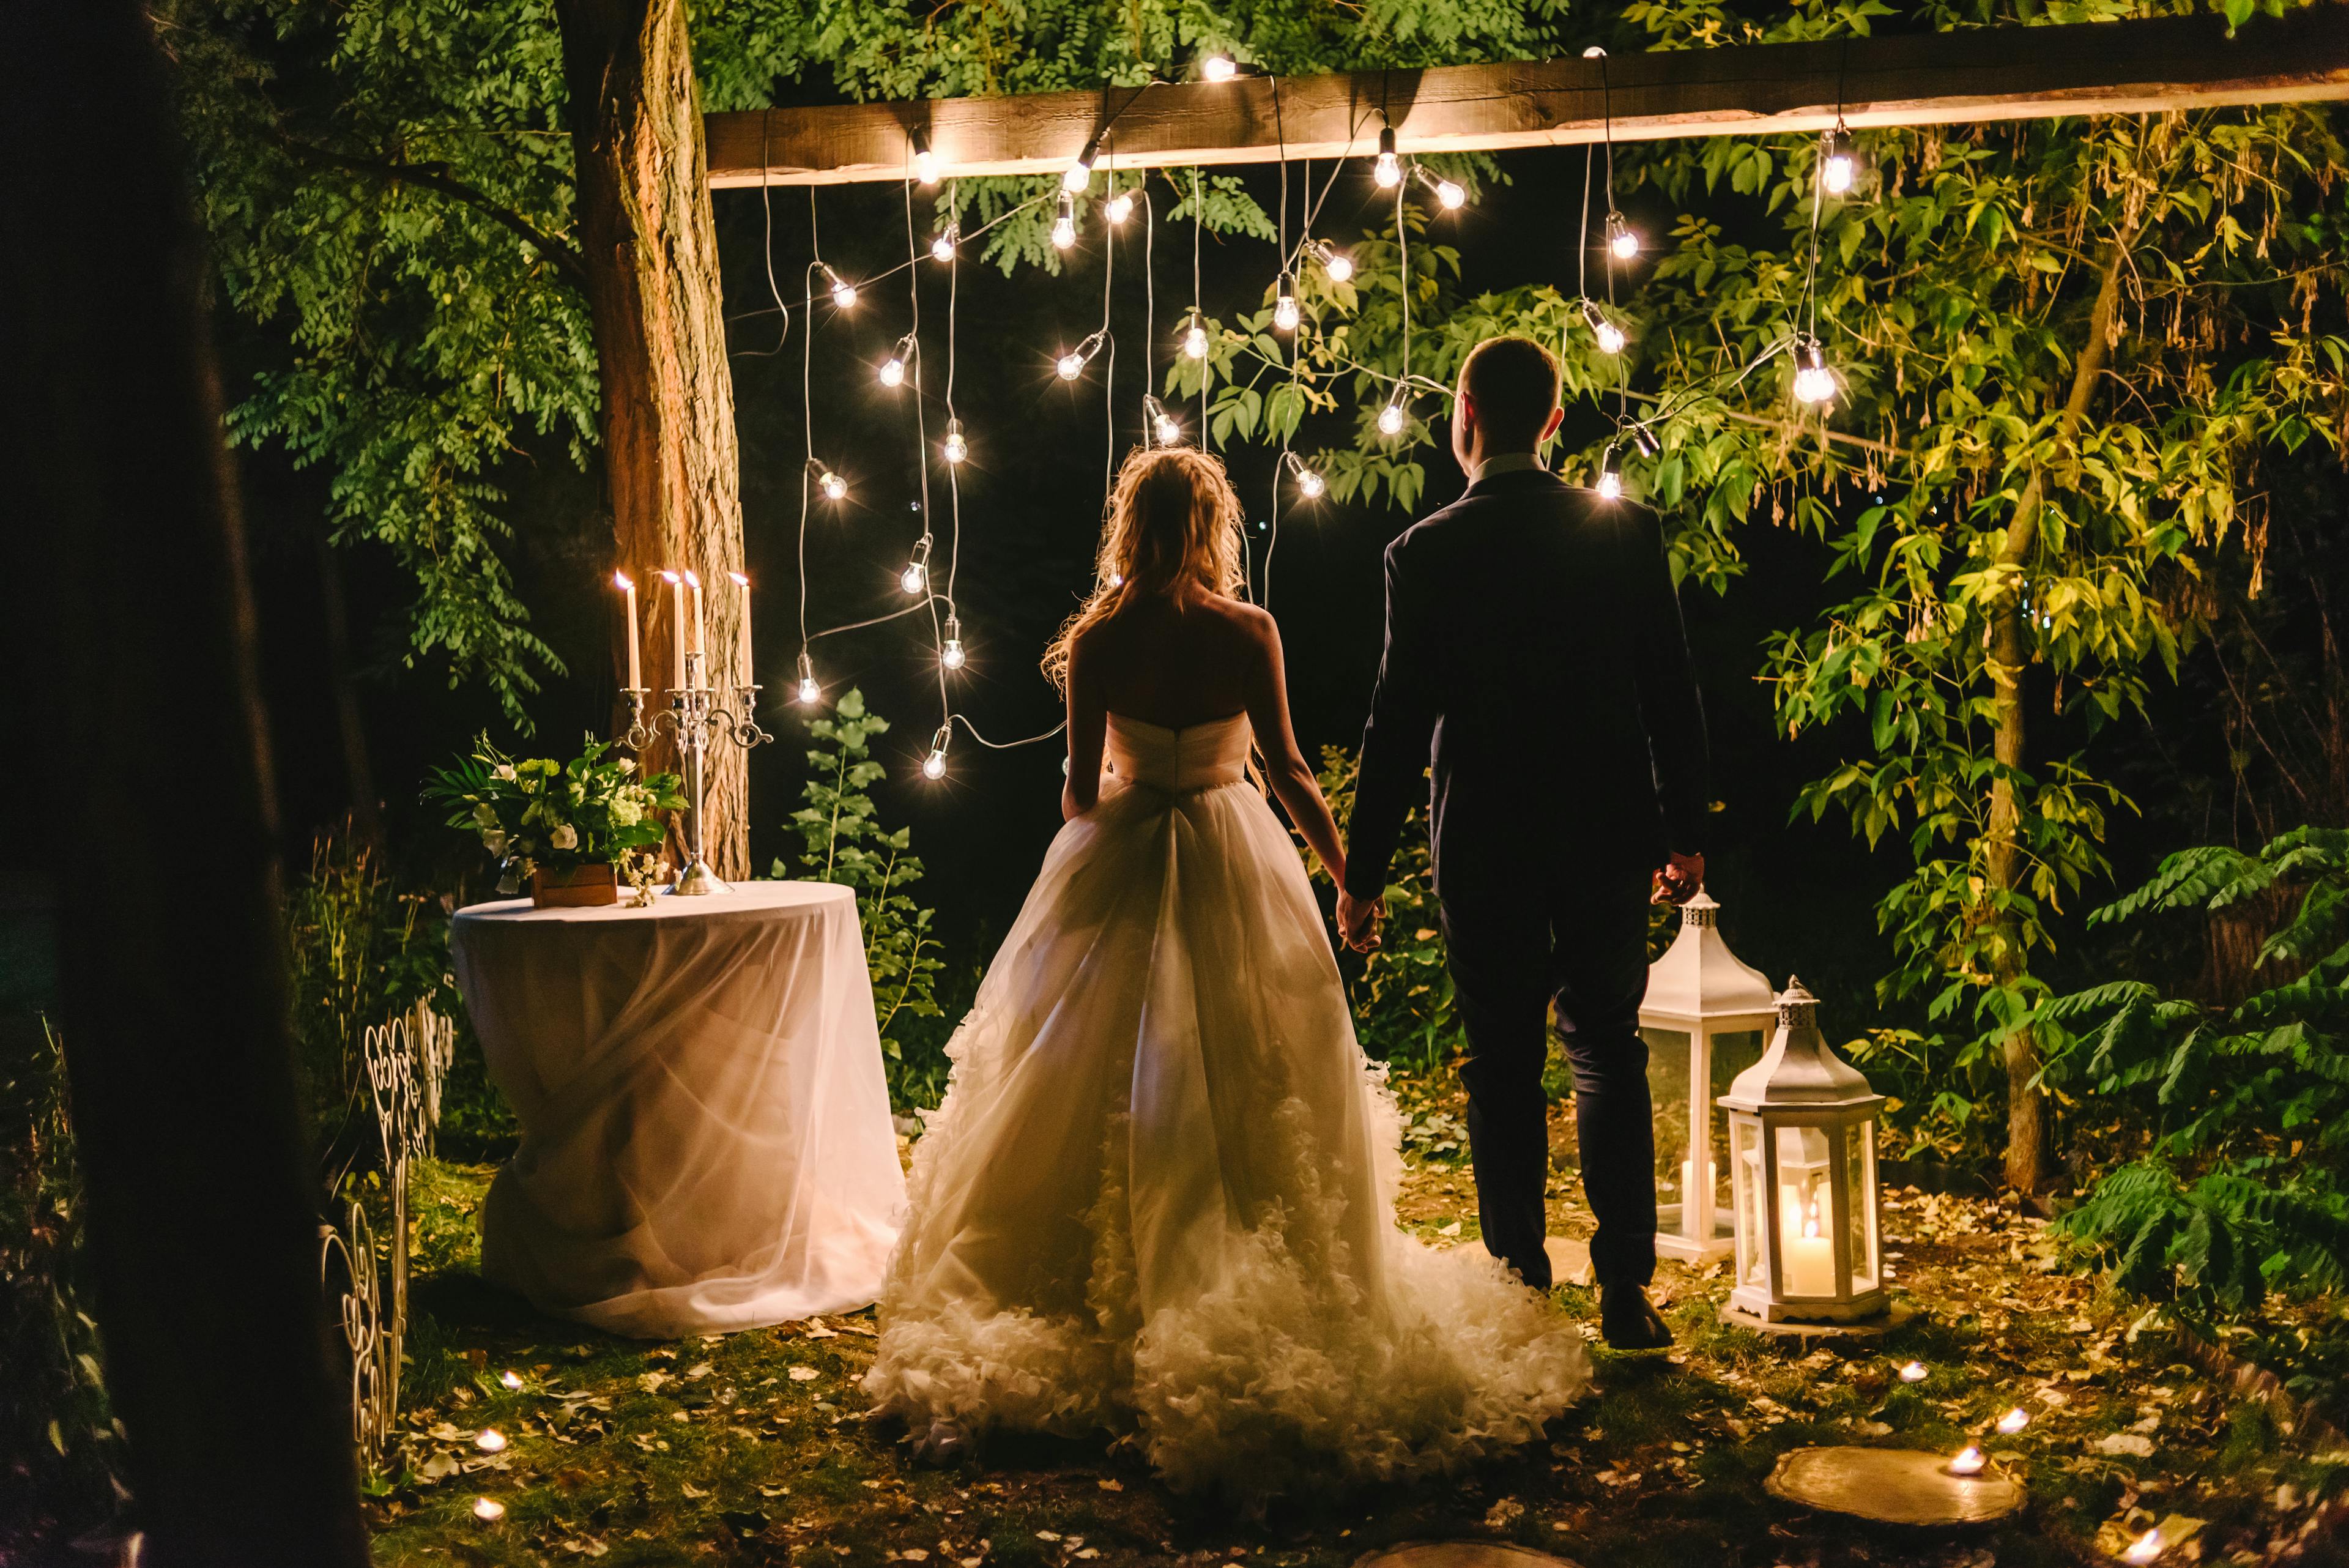 bride and groom standing together holding hands at night in front of string lights